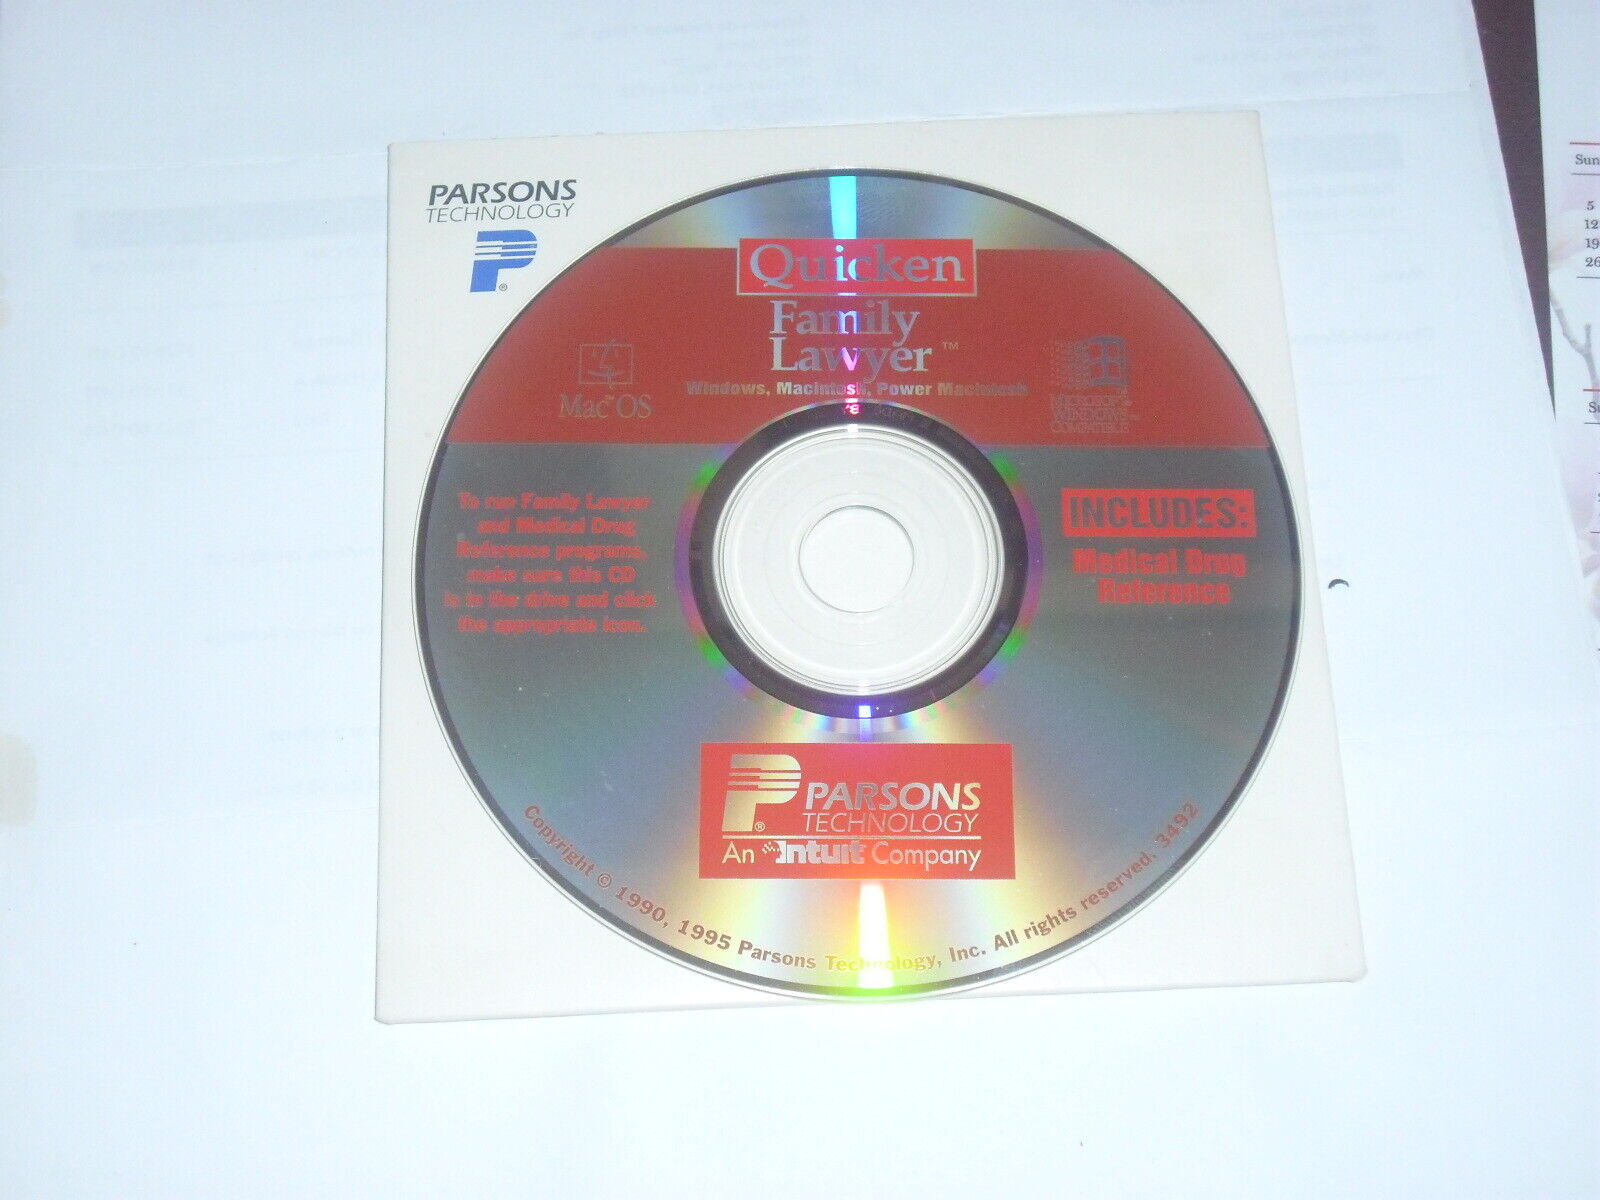 Parsons Quicken Family Lawyer, 1995, for Mac OS 7.x & Windows 3.1, 95